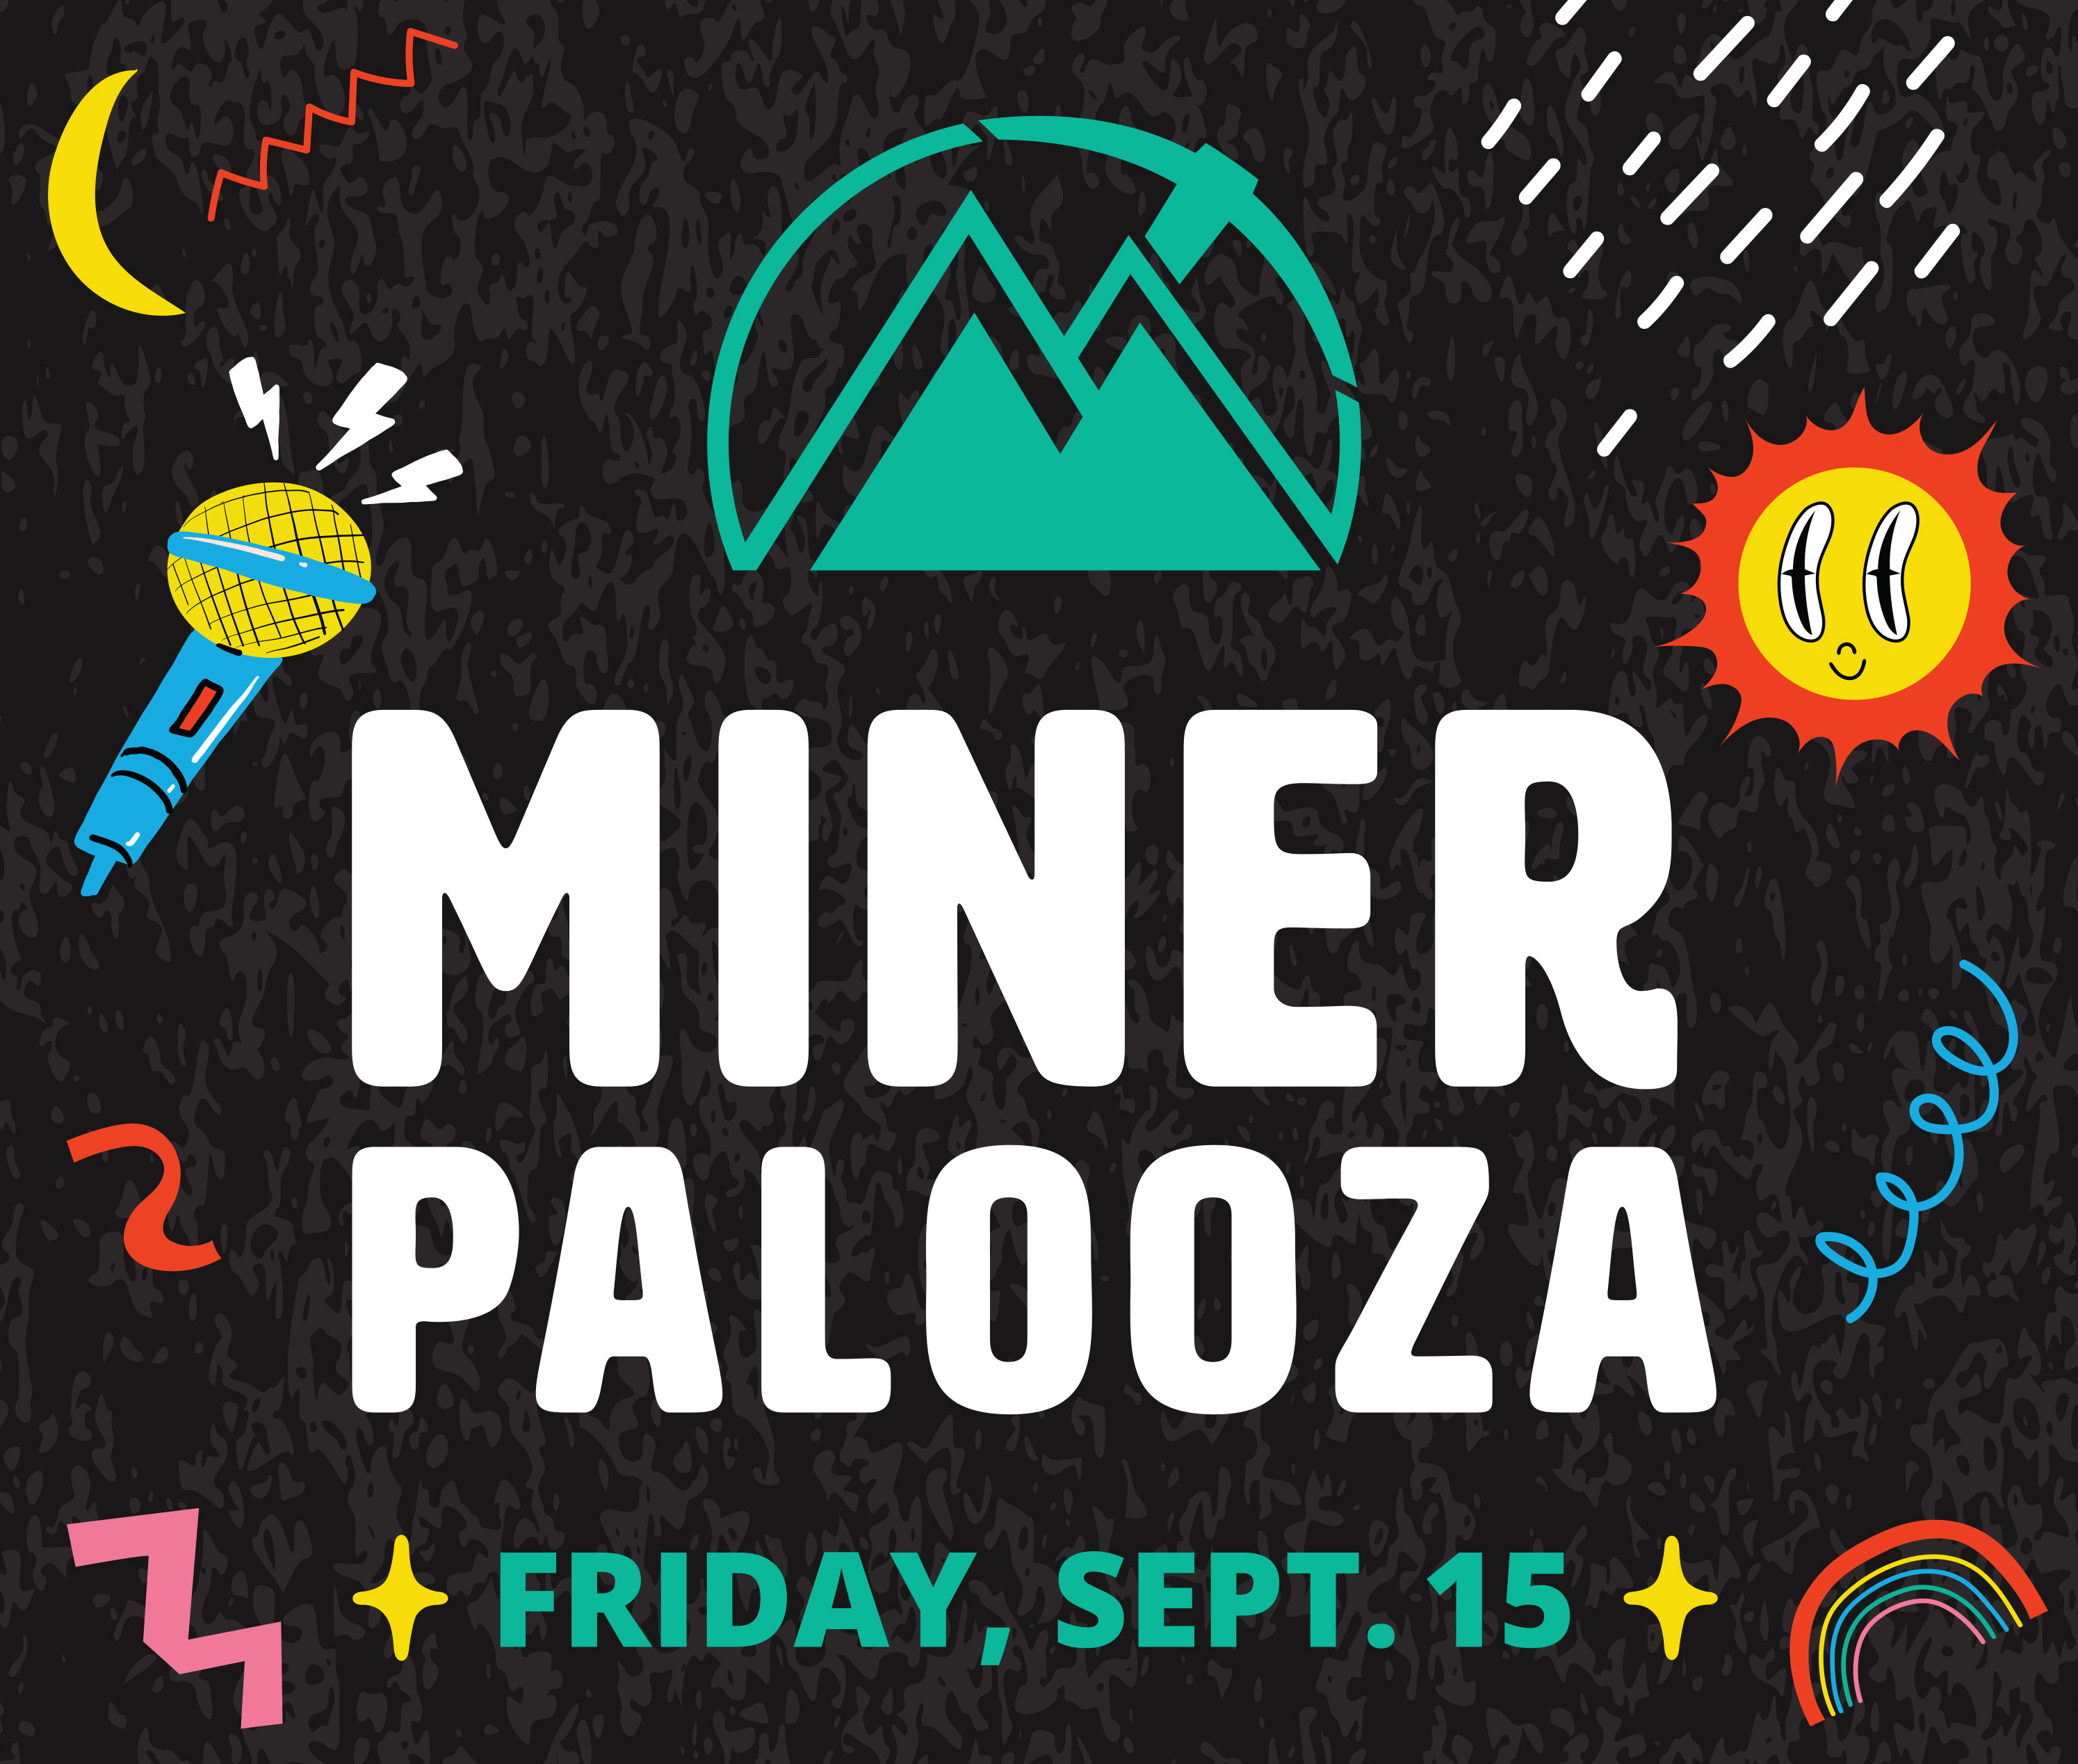 Minerpalooza – one of the signature events for The University of Texas at El Paso and the El Paso community – will return to the UTEP campus Friday, Sept. 15. The annual celebration to kick off the academic year will take place from 6 to 11:30 p.m. Admission is free and open to the public.  